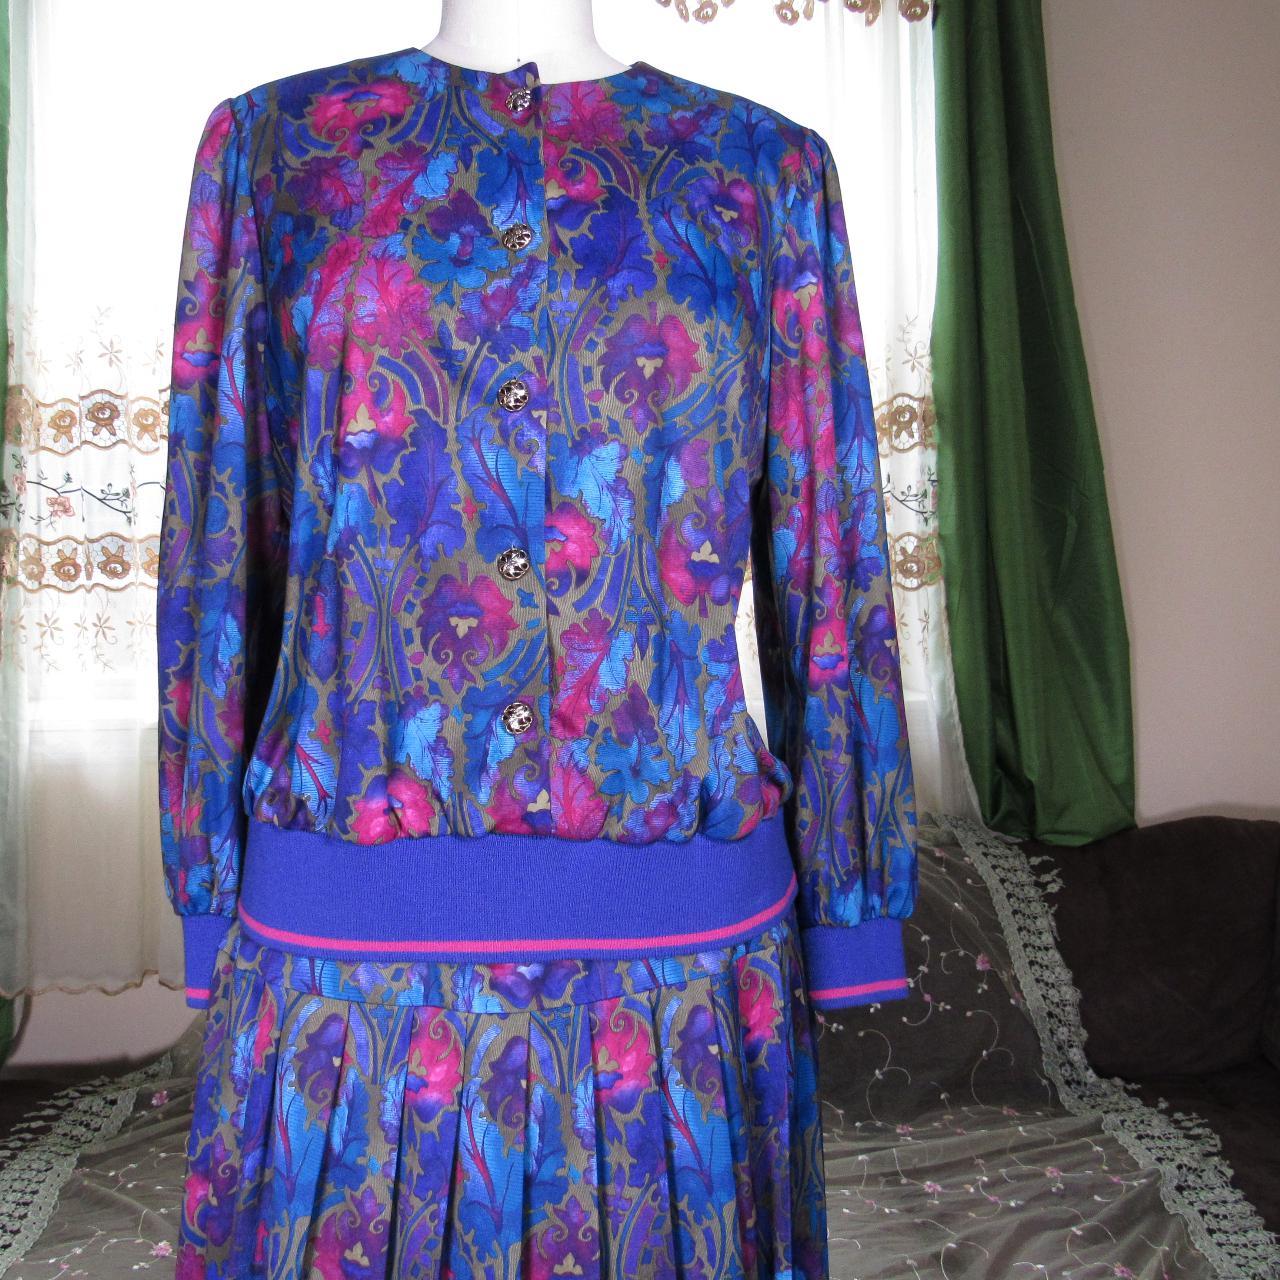 Product Image 2 - 2 piece vintage skirt and